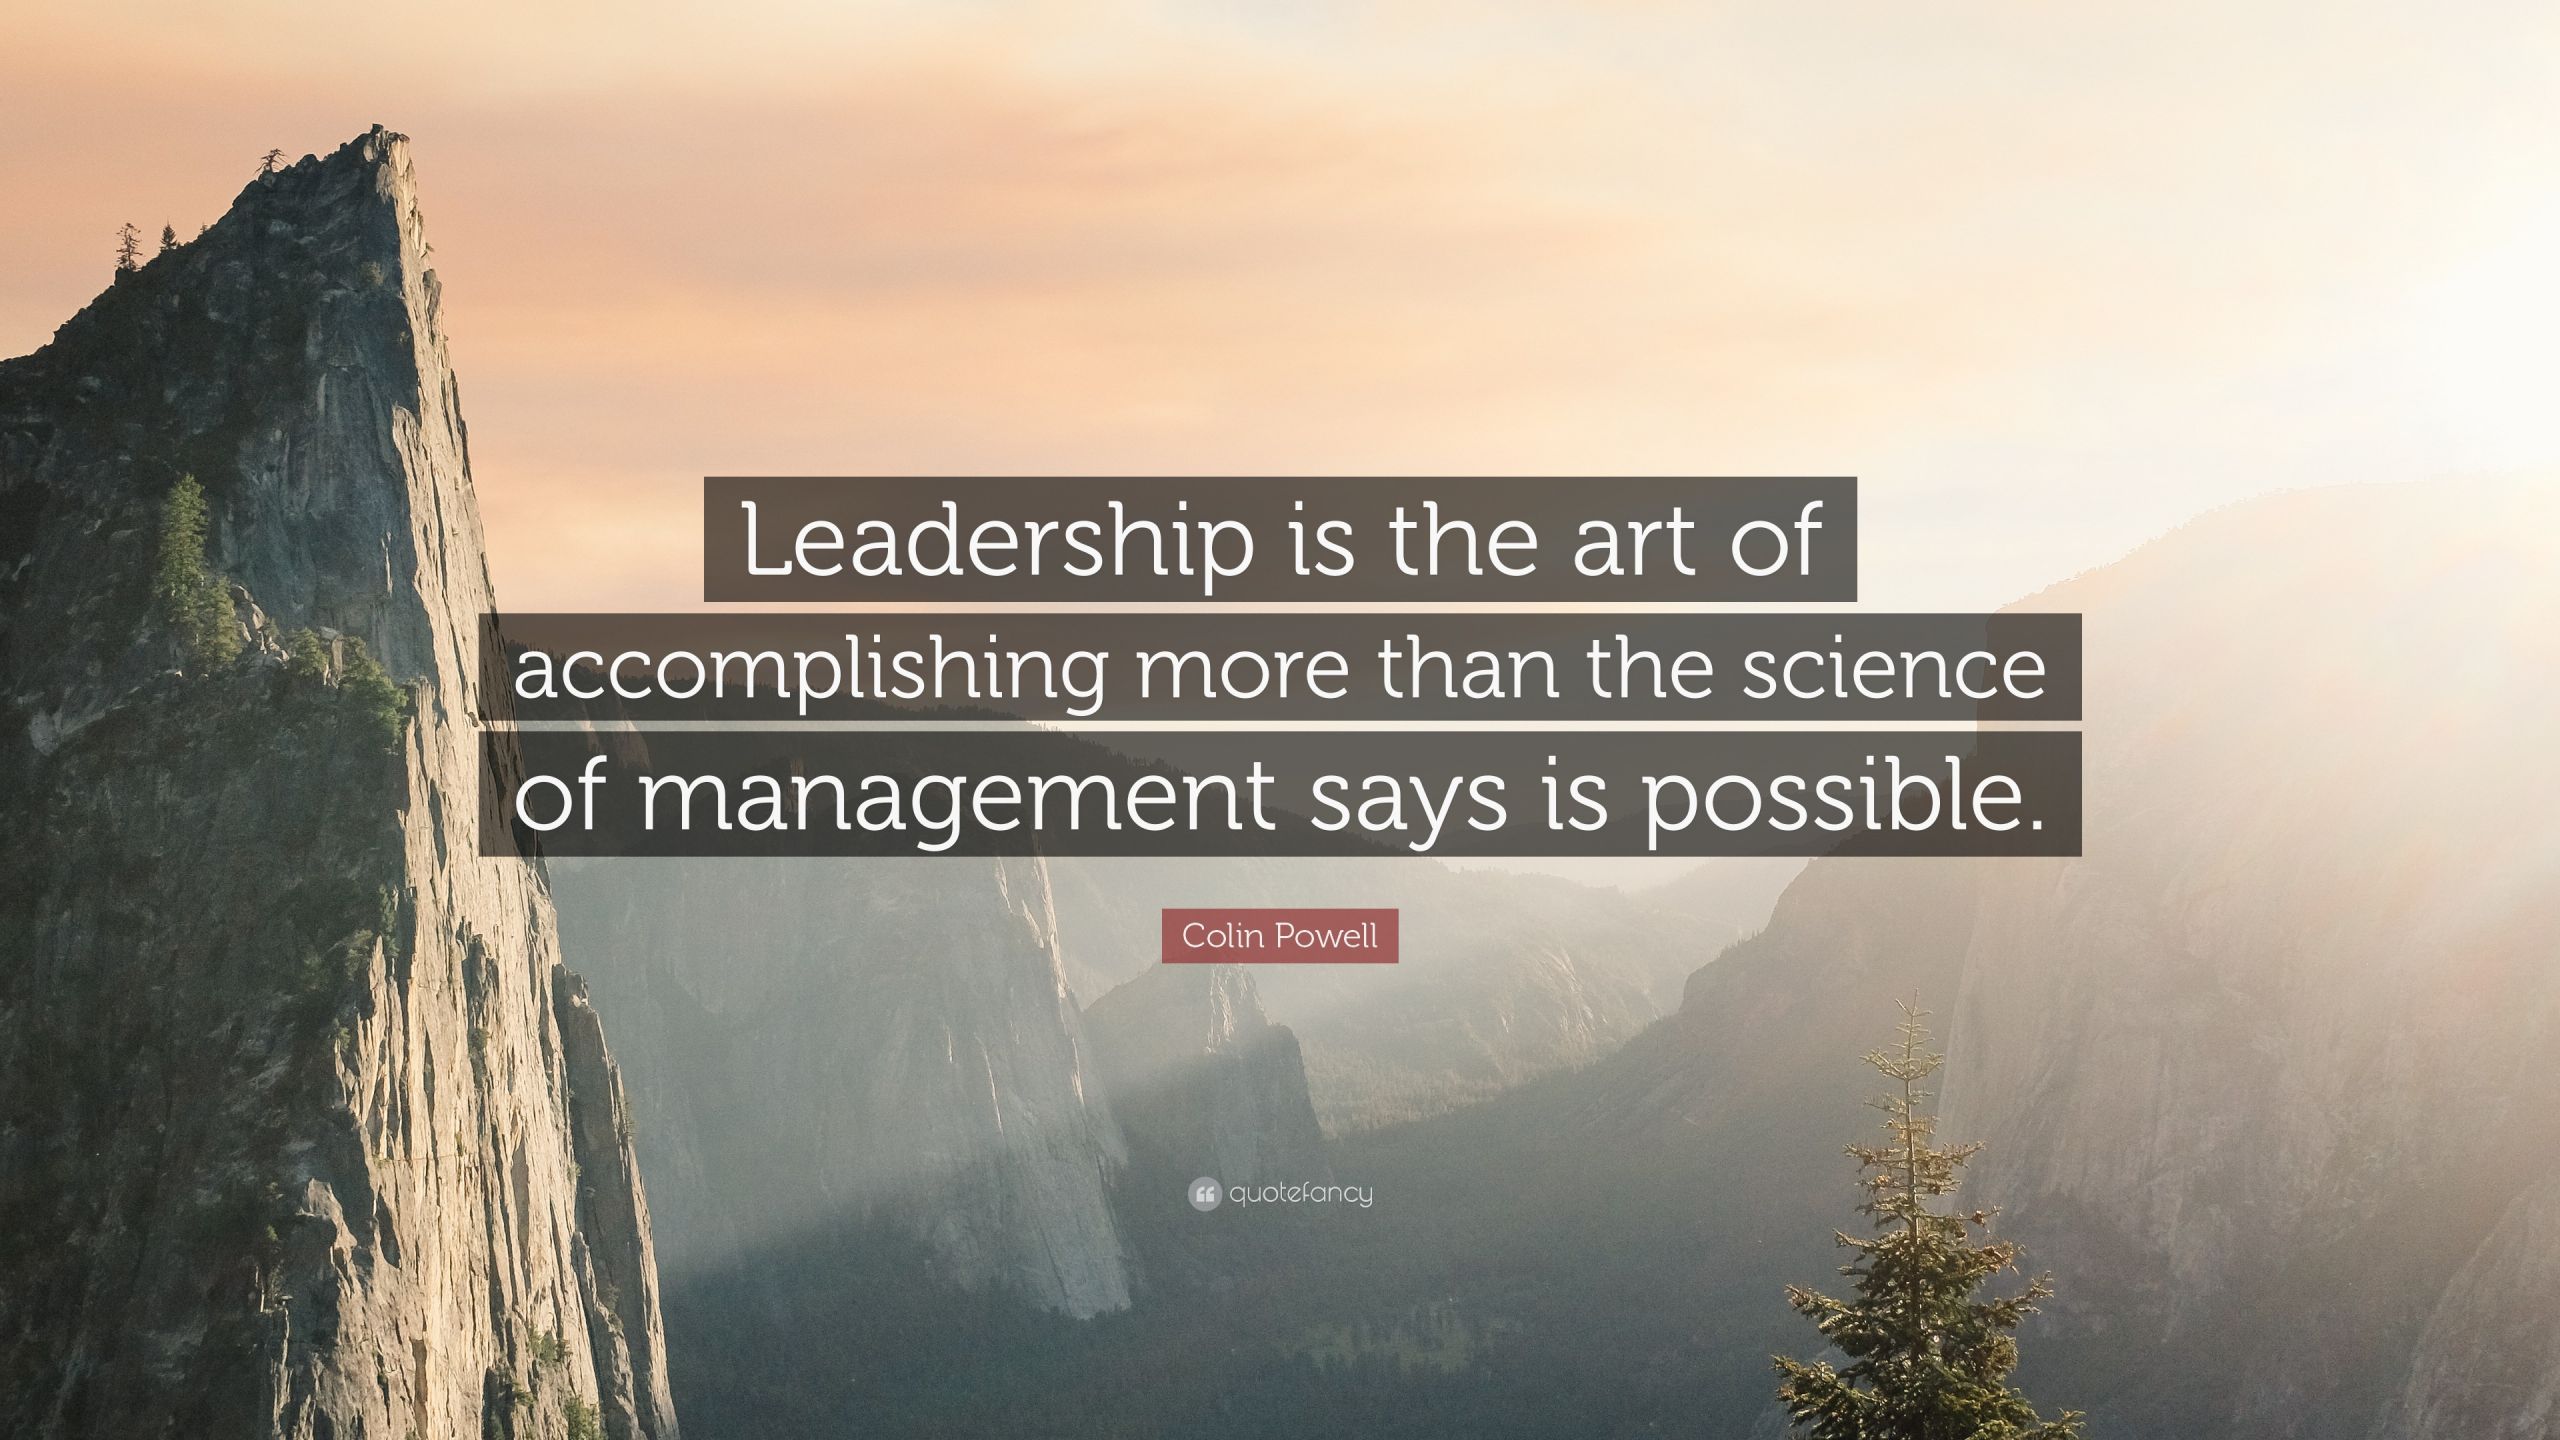 Colin Powell Leadership Quotes
 Colin Powell Quote “Leadership is the art of